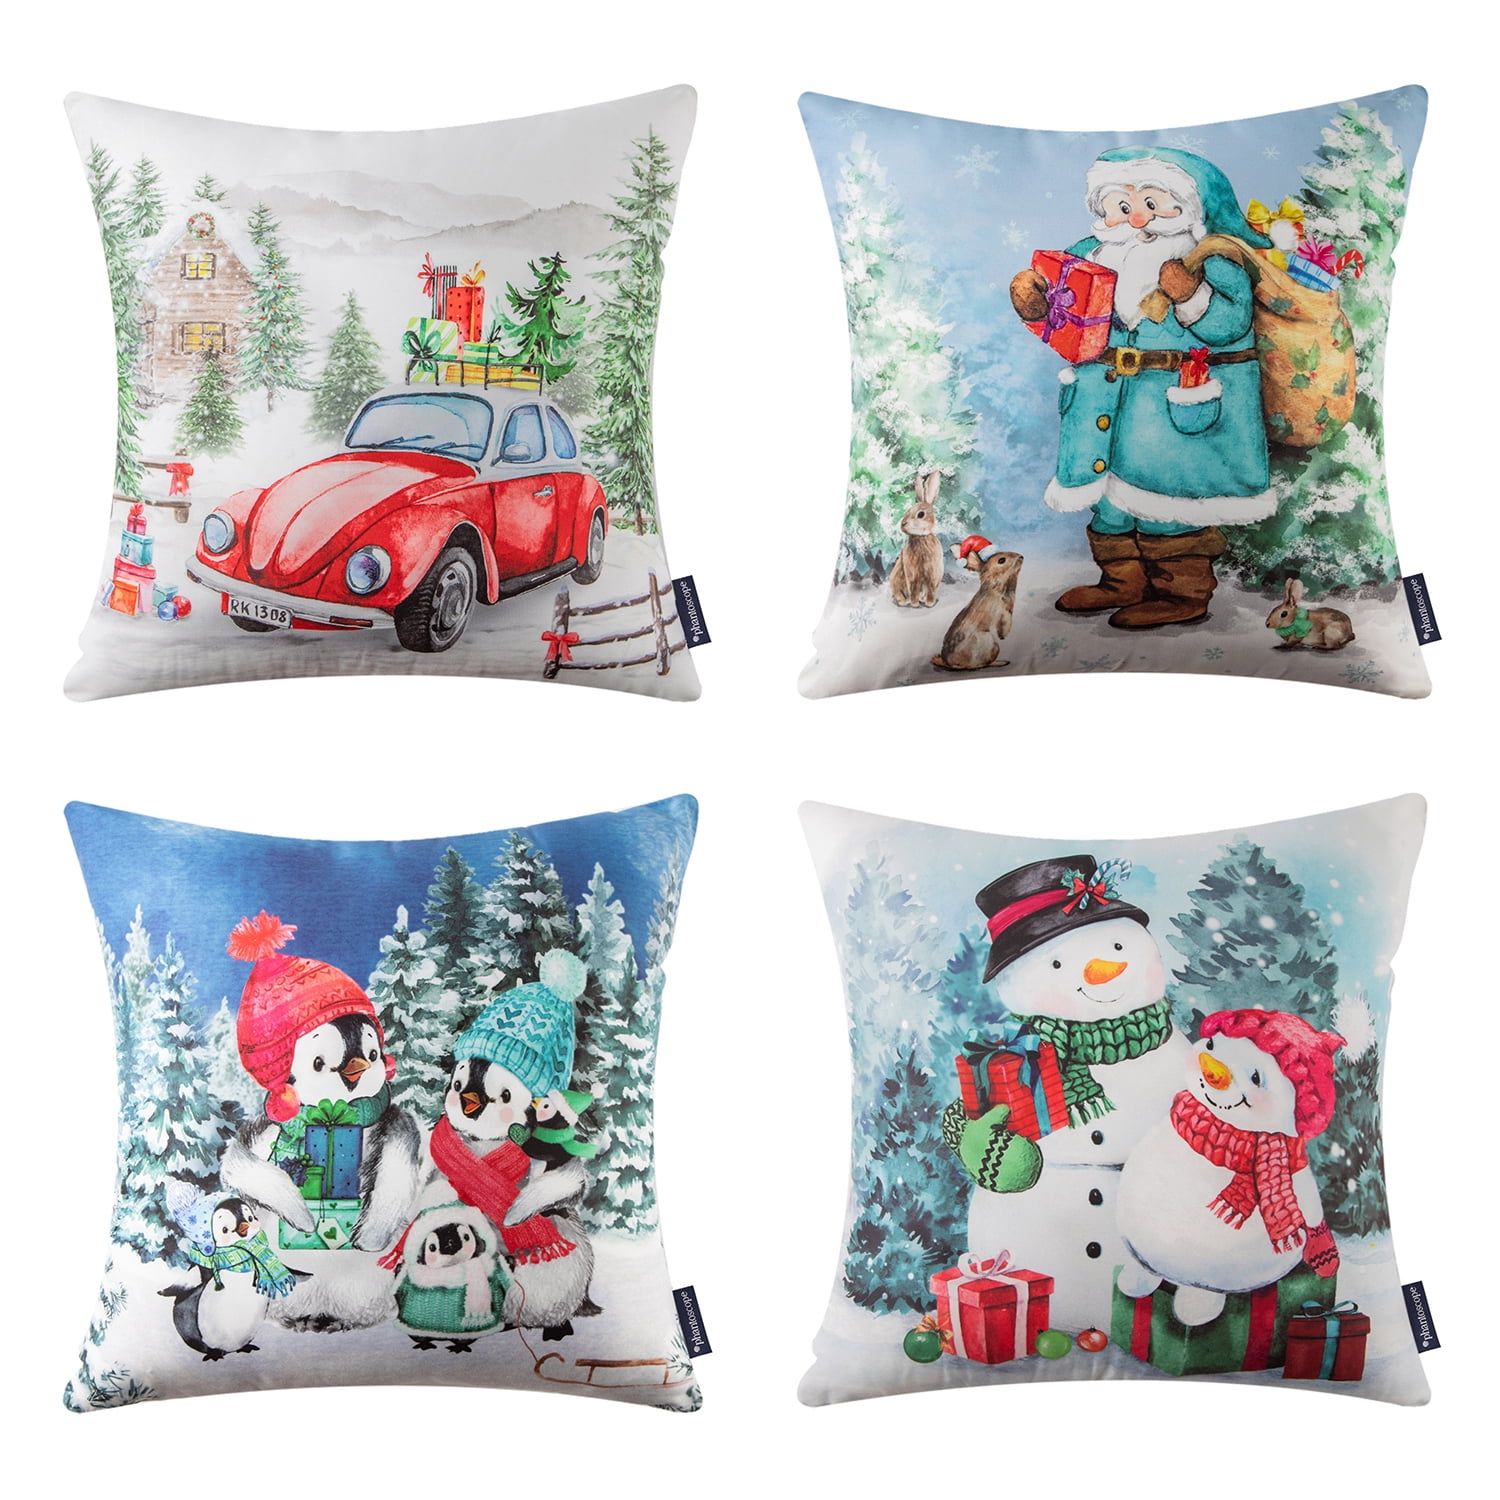 Christmas Penguin and Polar Bear Embroidered Decorative Holiday Series Throw Pillow with Inserts, Pink, 18 inch x 18 inch, Set of 4